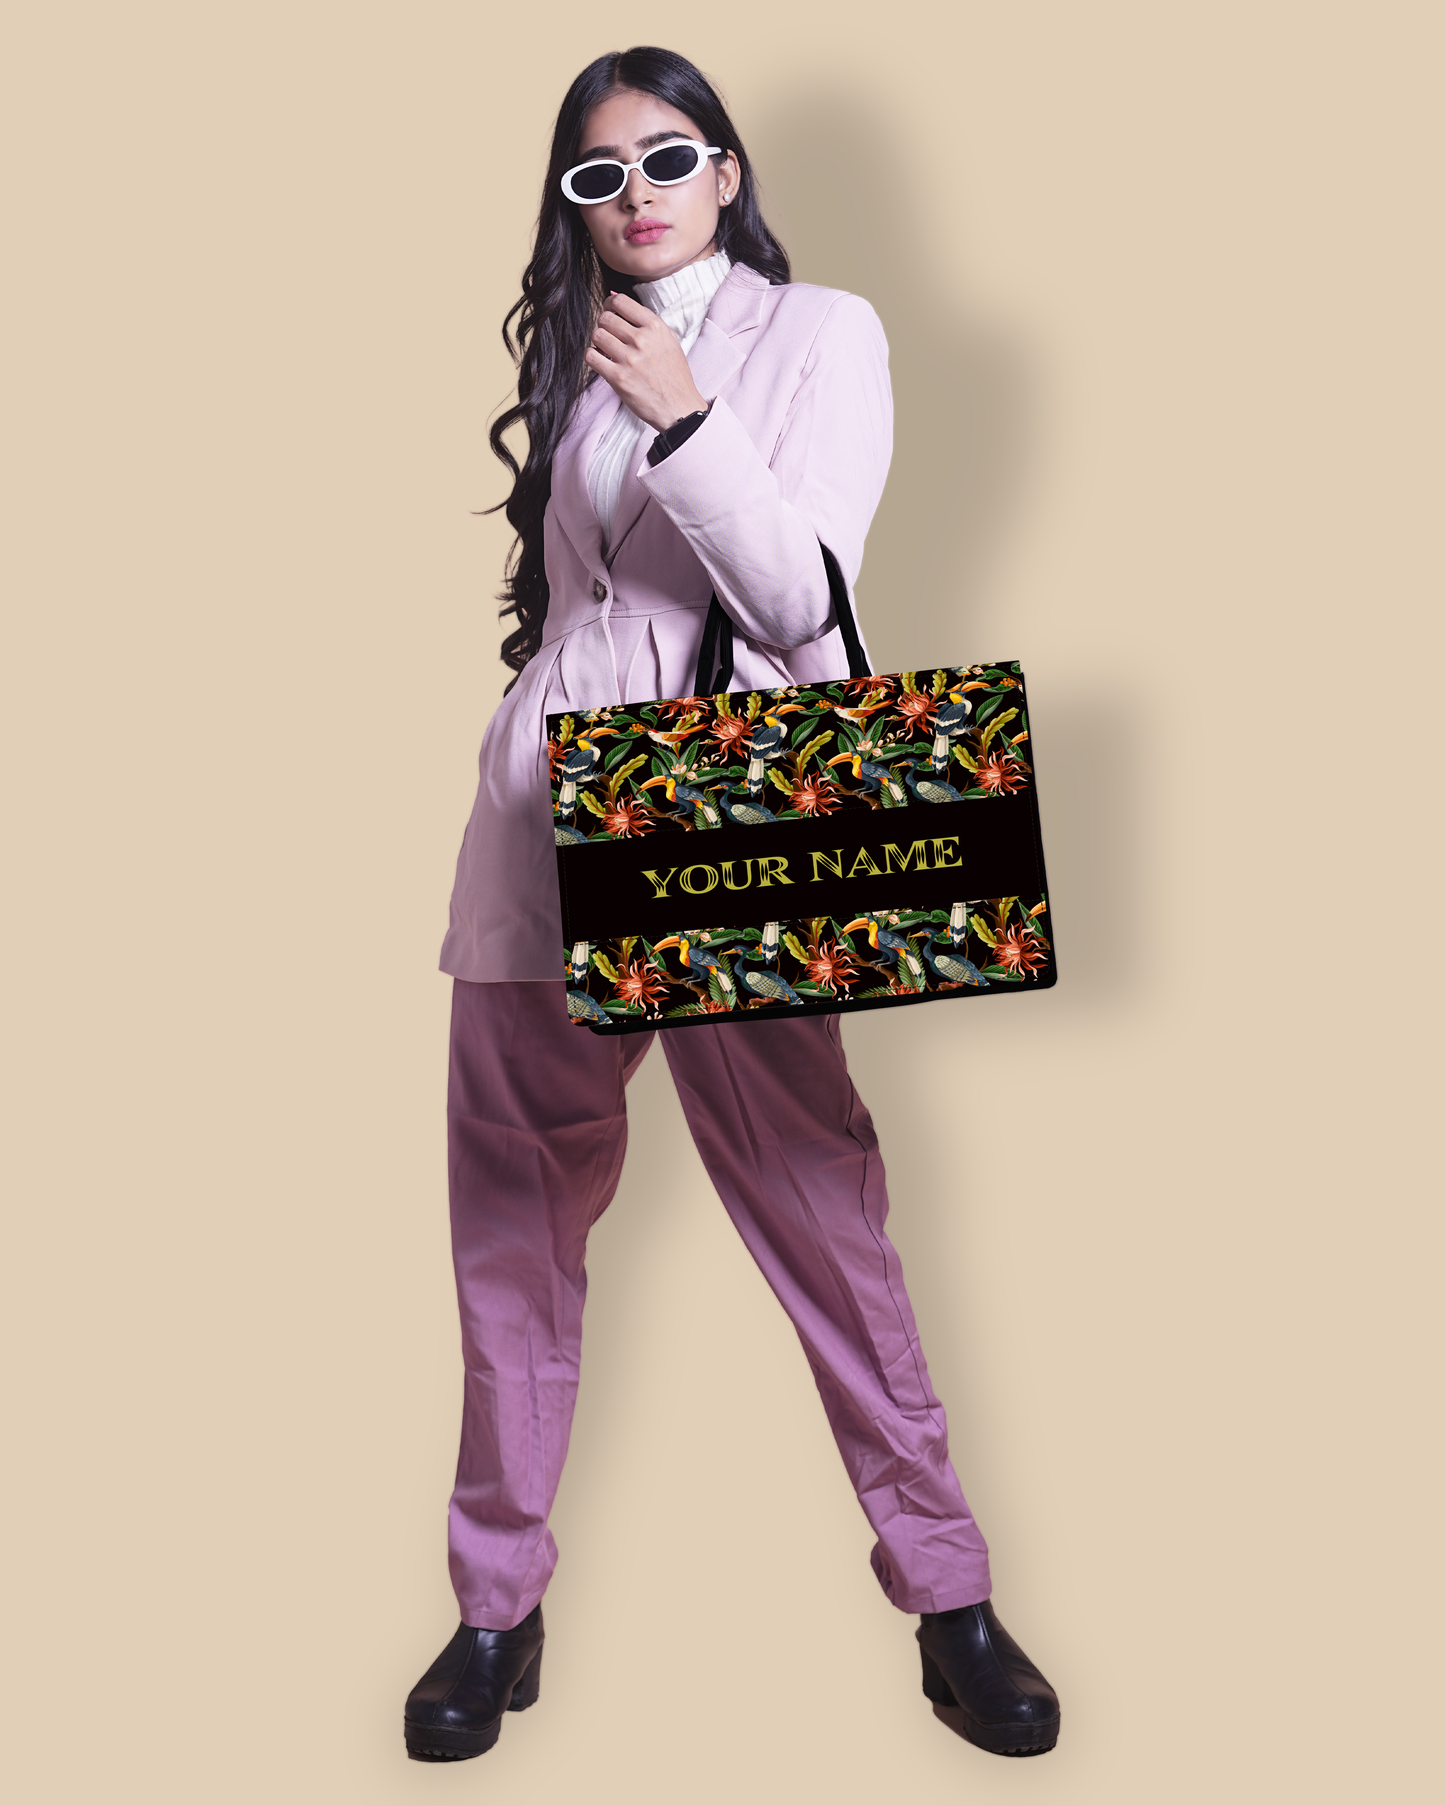 Customized Tote Bag Designed with Hornbill , Carens Birds And Tropical Flowers